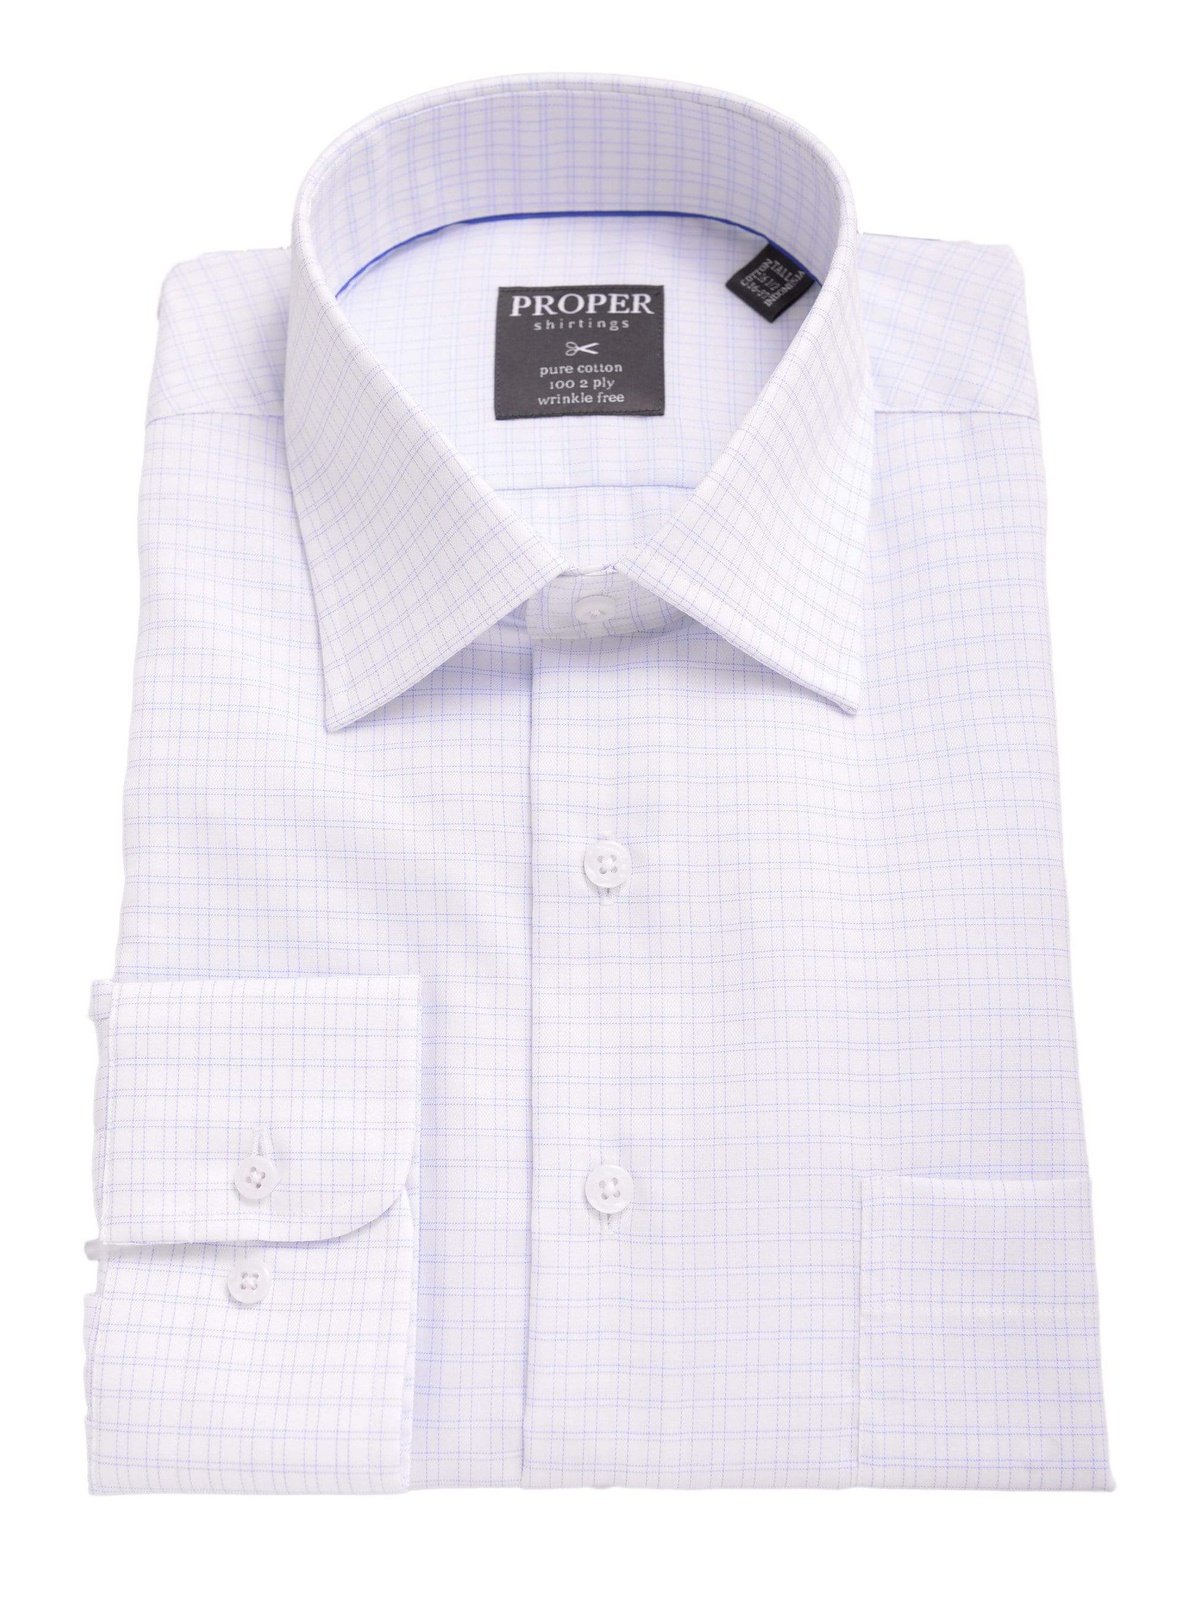 Proper Shirtings SHIRTS 18 1/2 34/35 Mens Classic Fit White And Blue Plaid Spread Collar 100 2 Ply Cotton Dress Shirt